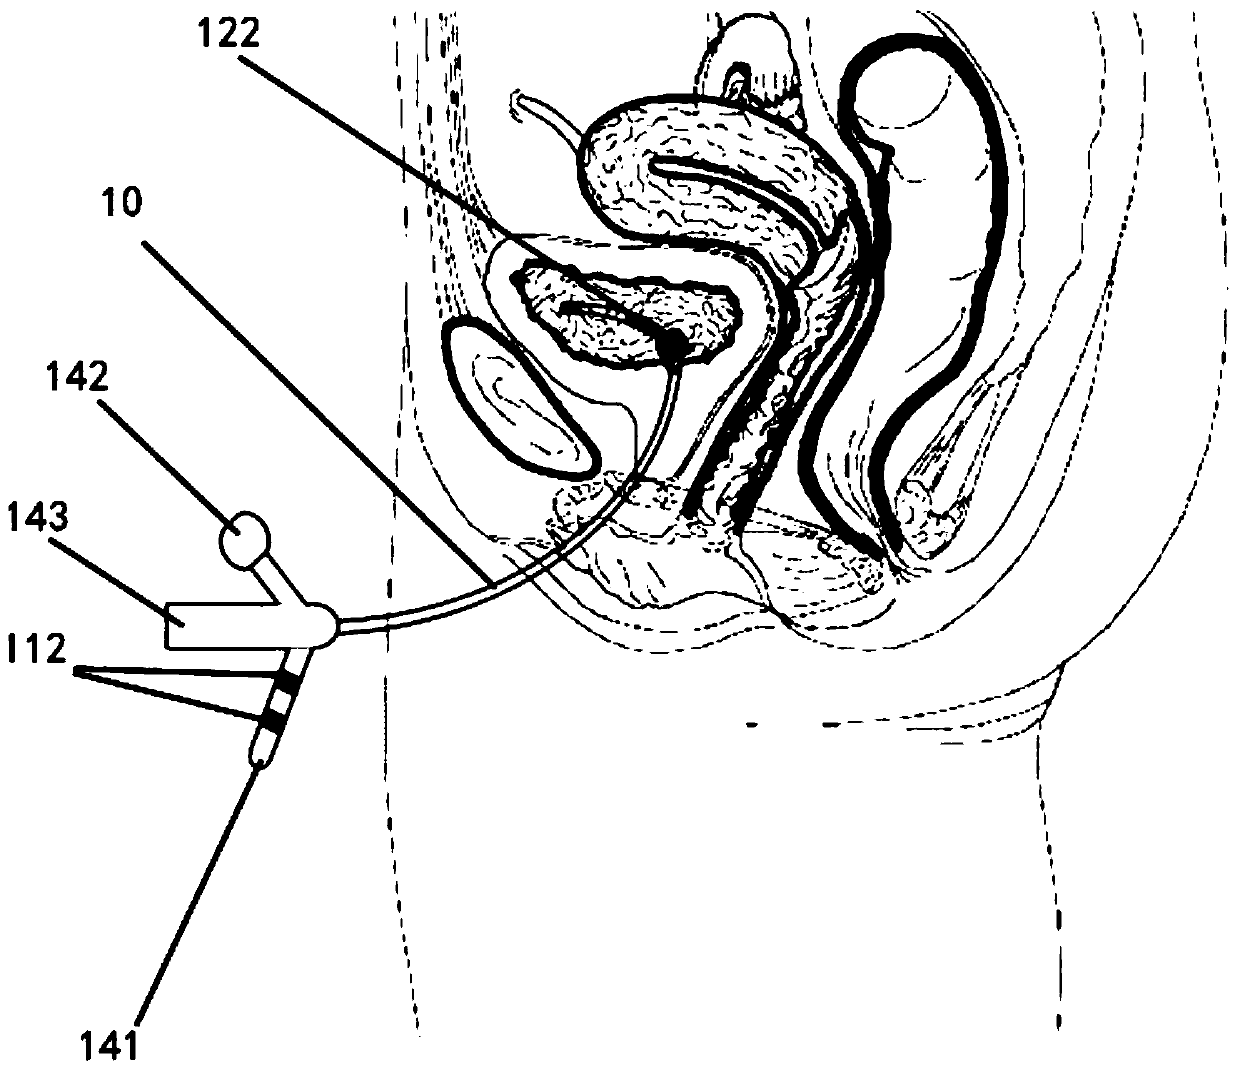 Intravesical catheter integrated with stimulating electrode